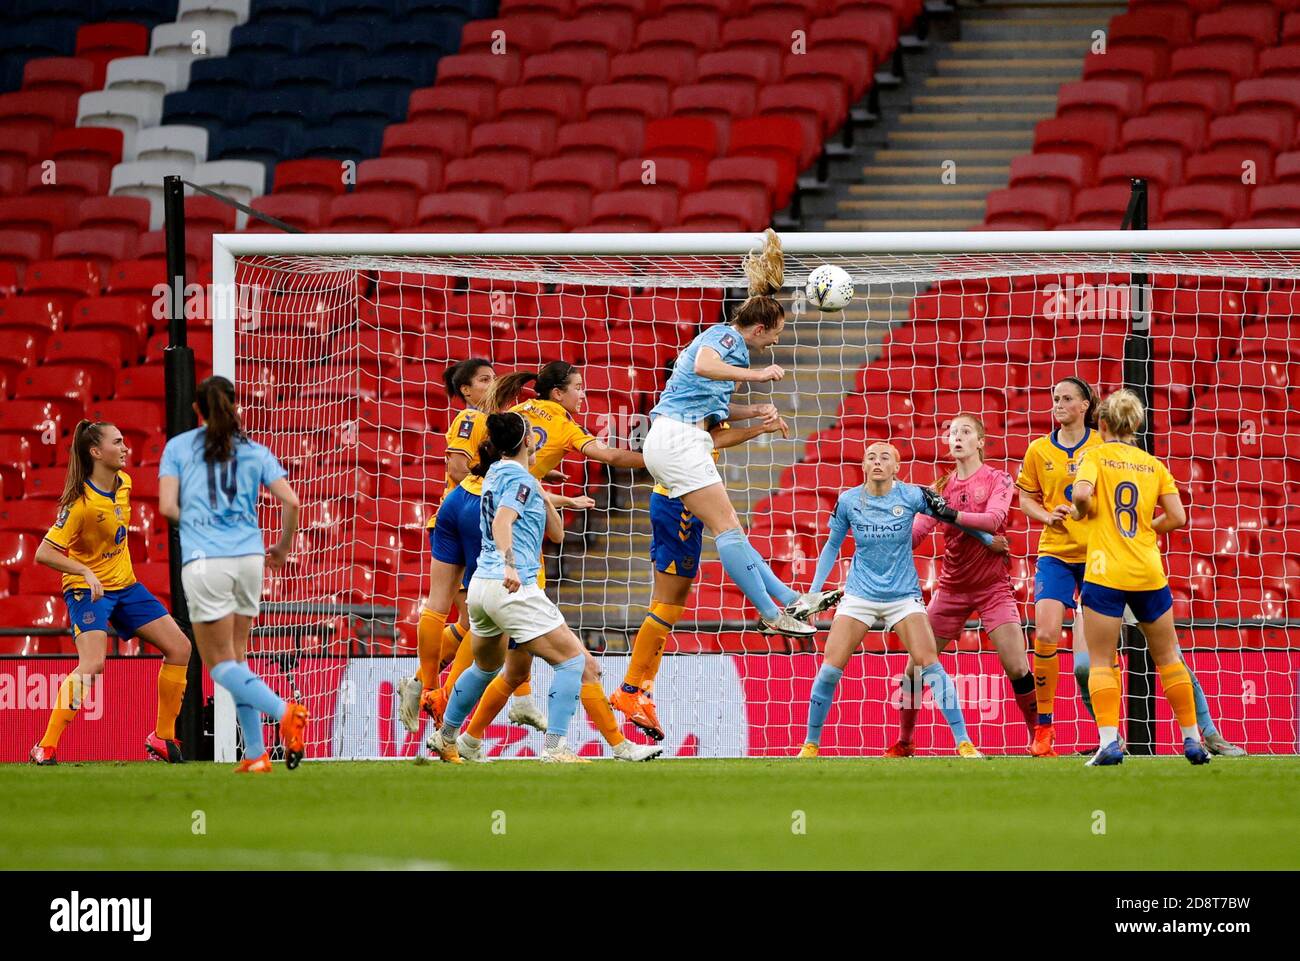 Manchester City S Sam Mewis Centre Scores Her Sides First Goal Of The Game With A Header